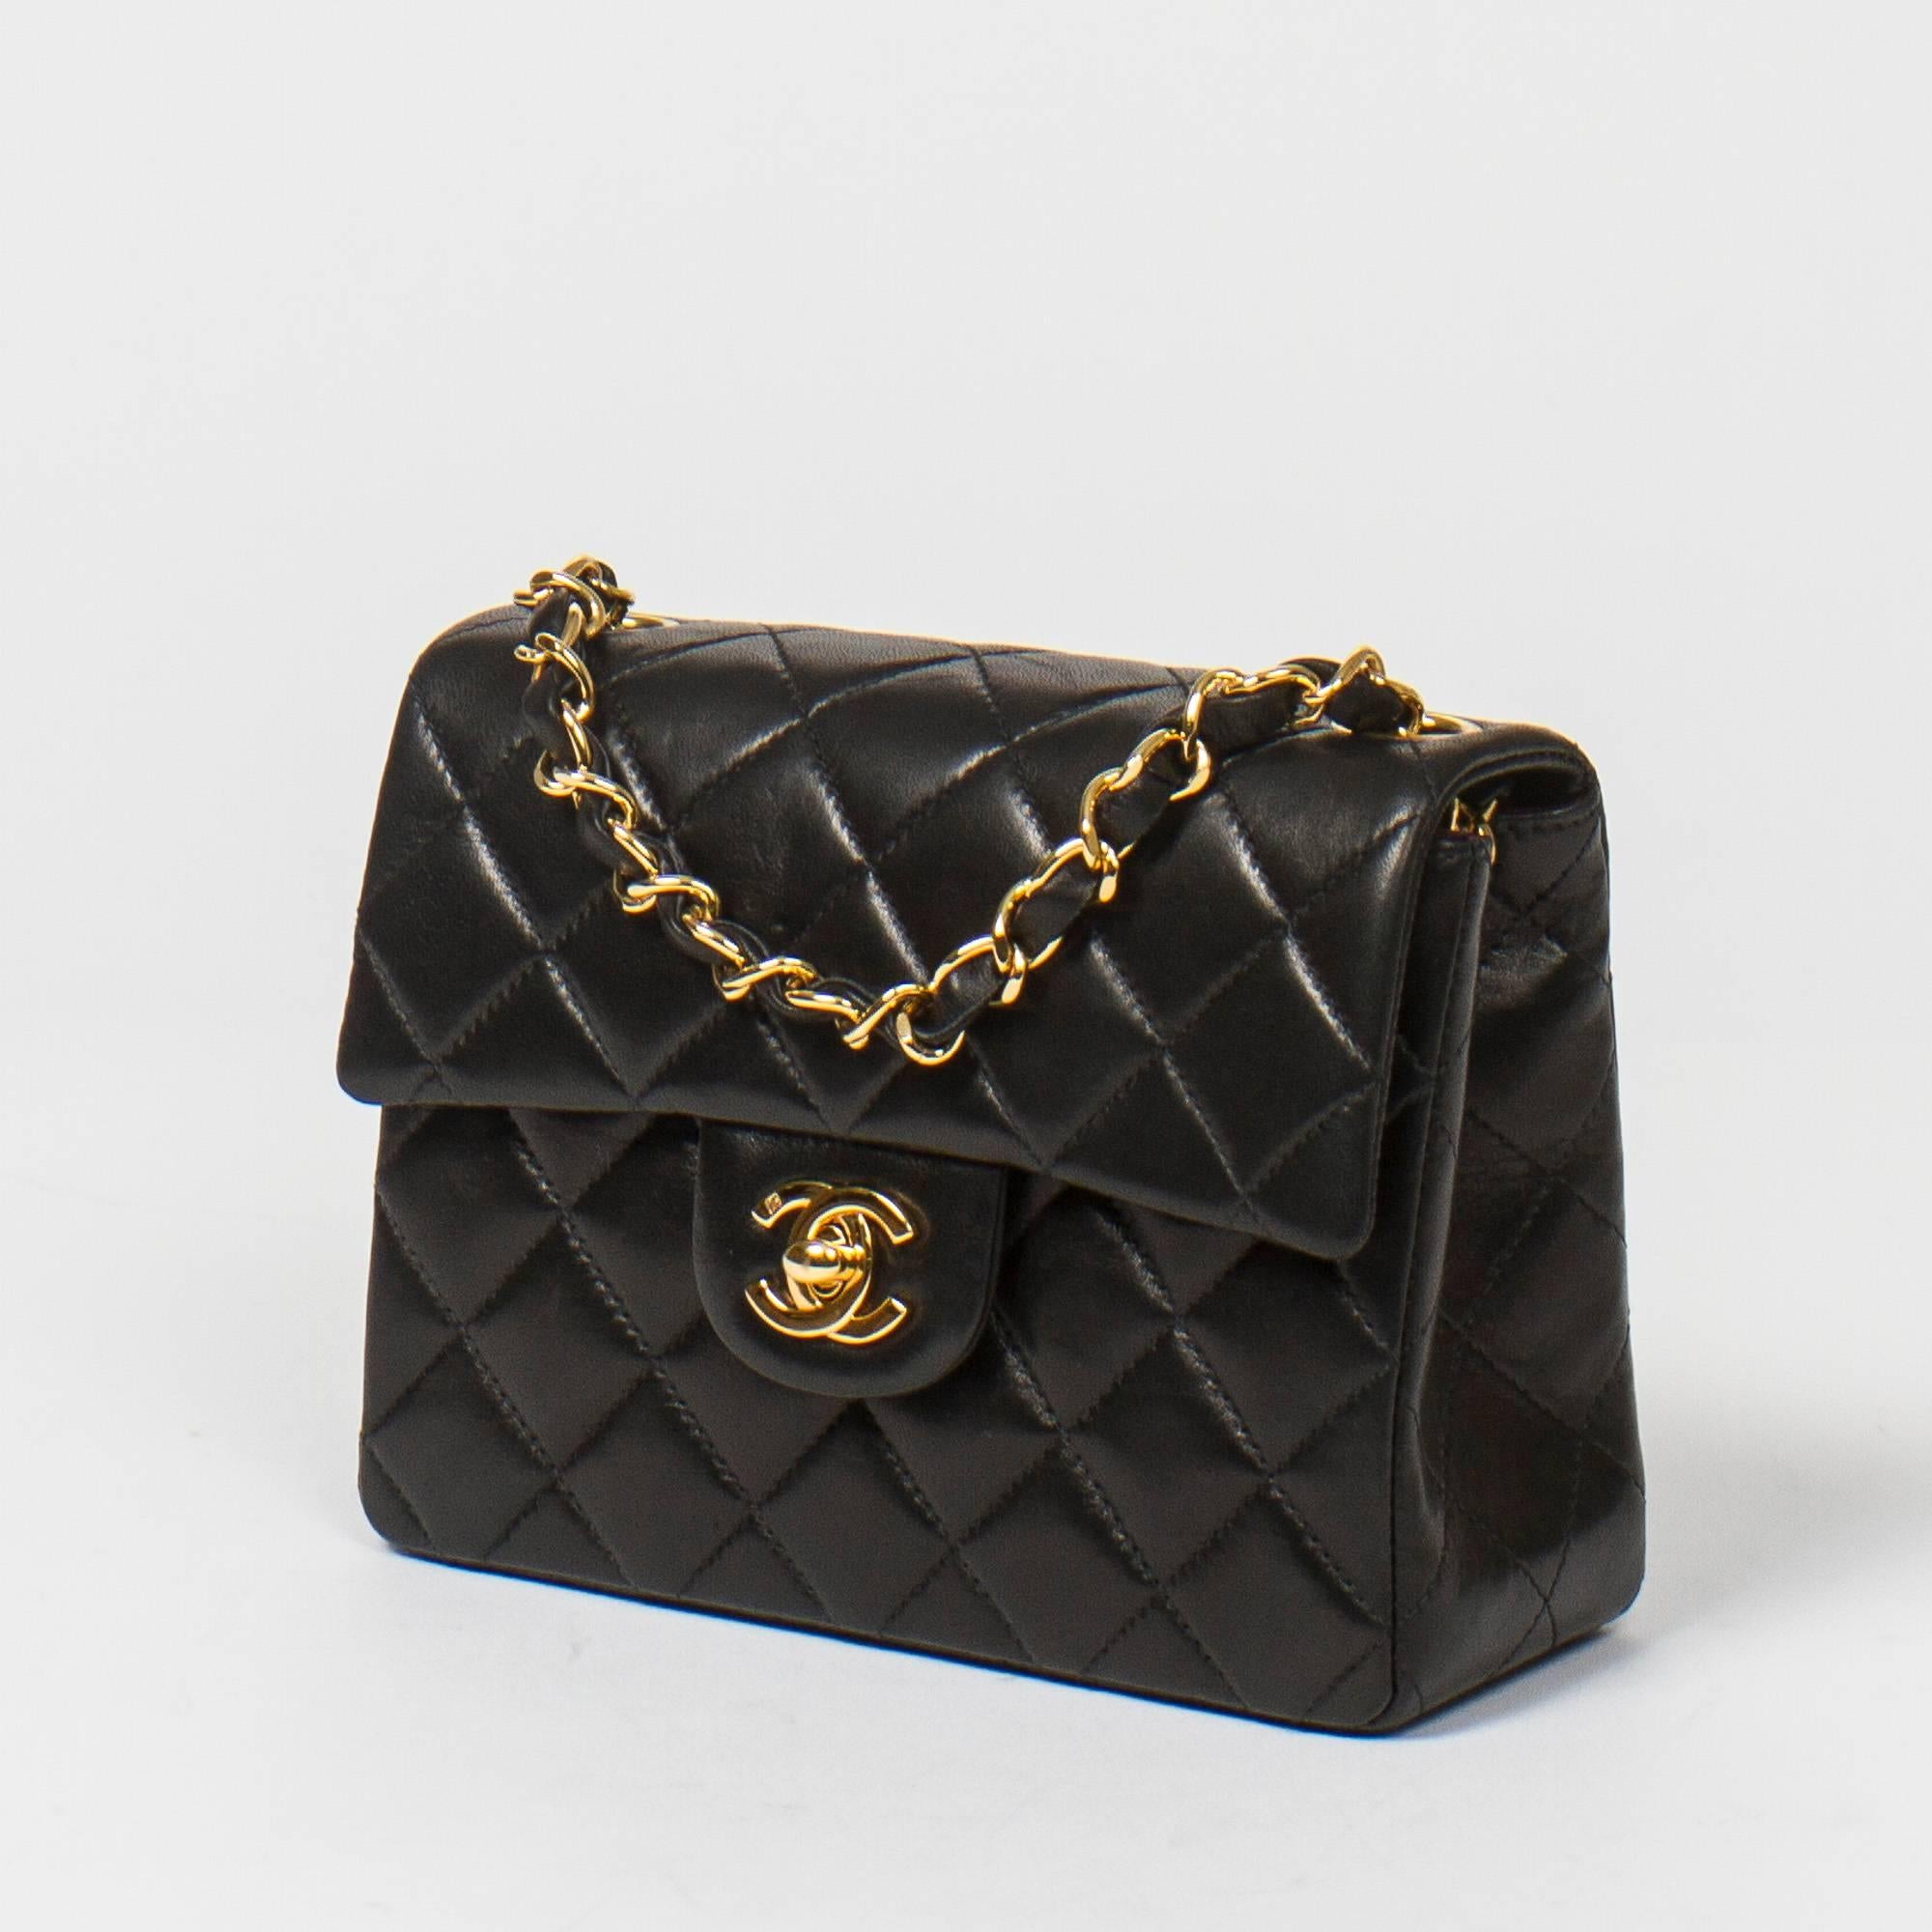 Classic Mini Flap 17cm in black quilted lambskin with chain strap interlaced with leather, gold tone CC turnlock. Back slip pocket. Burgundy leather lined interior with one slip and one zip pocket. Gold tone 